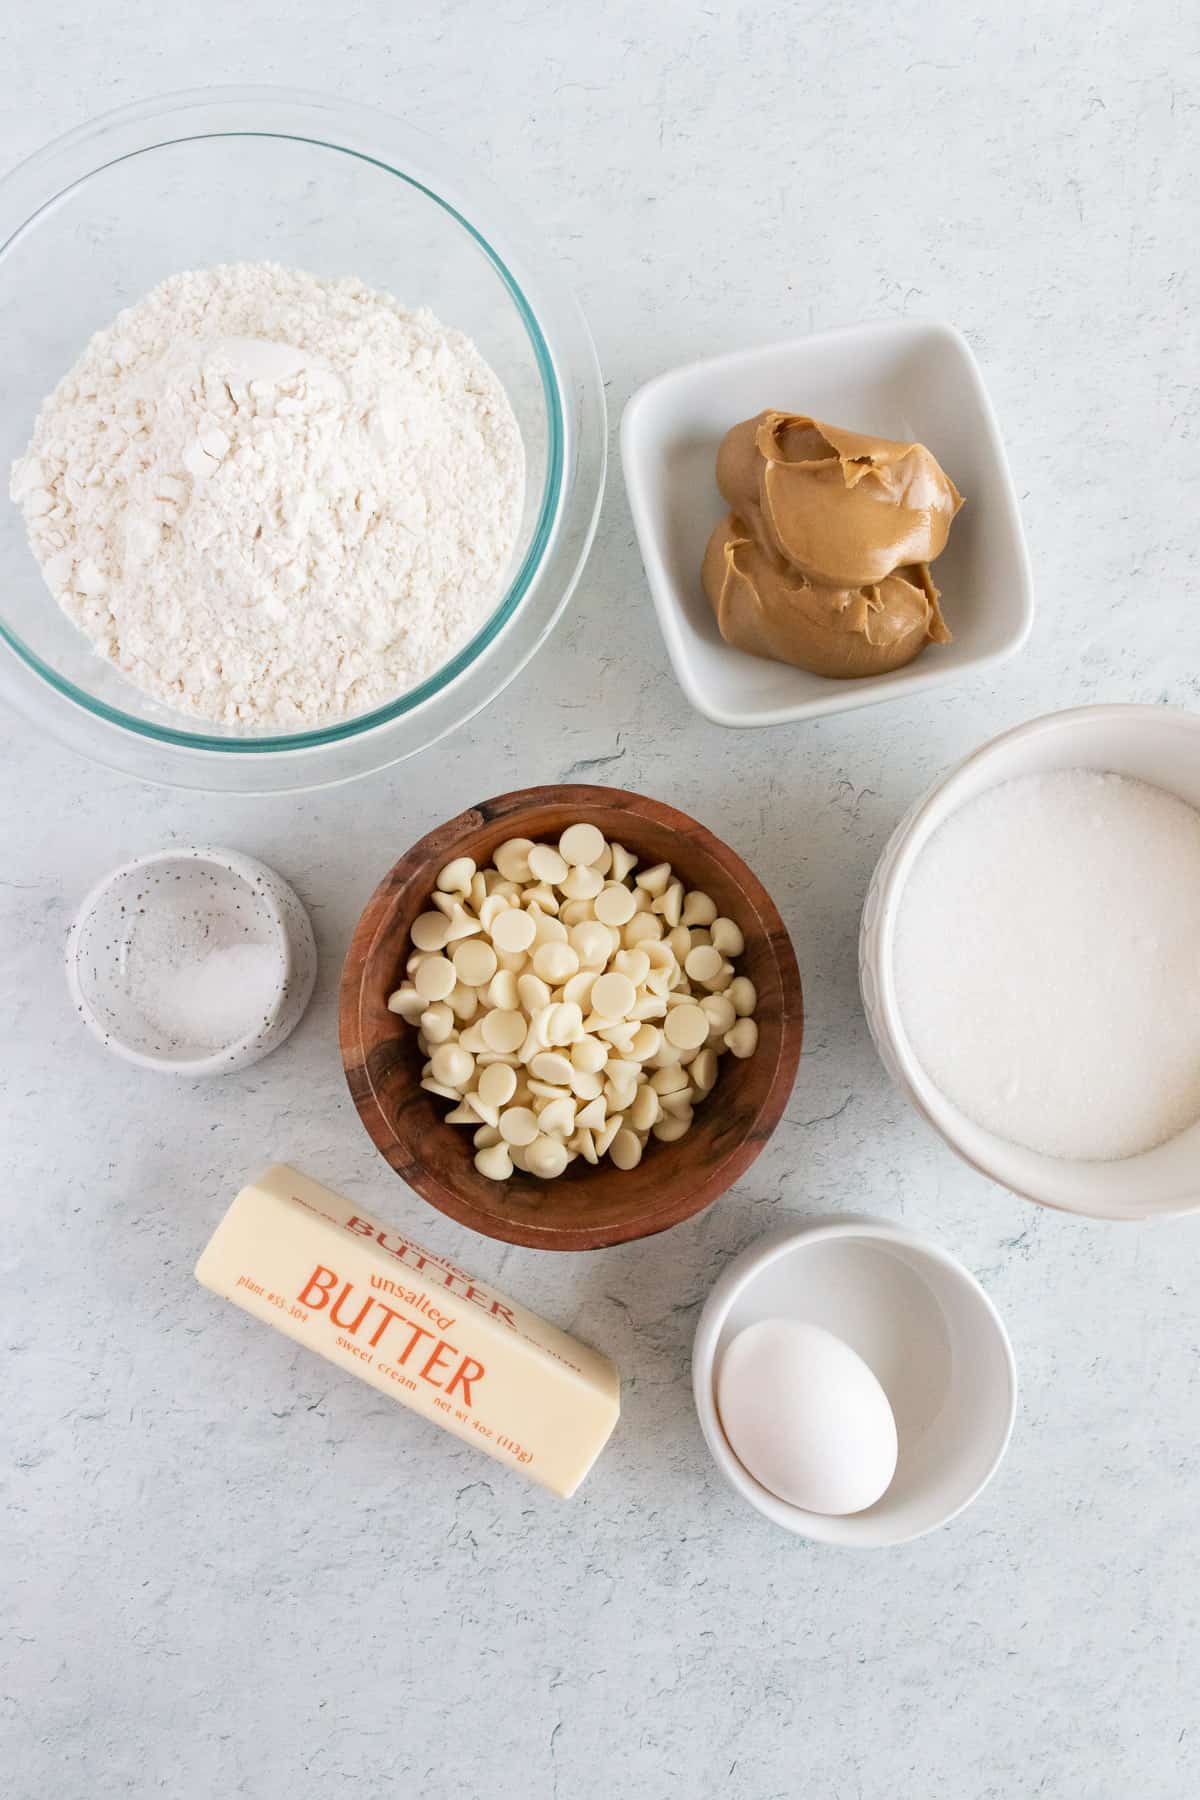 Flour, peanut butter, white chocolate chips, salt, butter, egg, and sugar in individual bowls for making peanut butter white chocolate cookie dough.